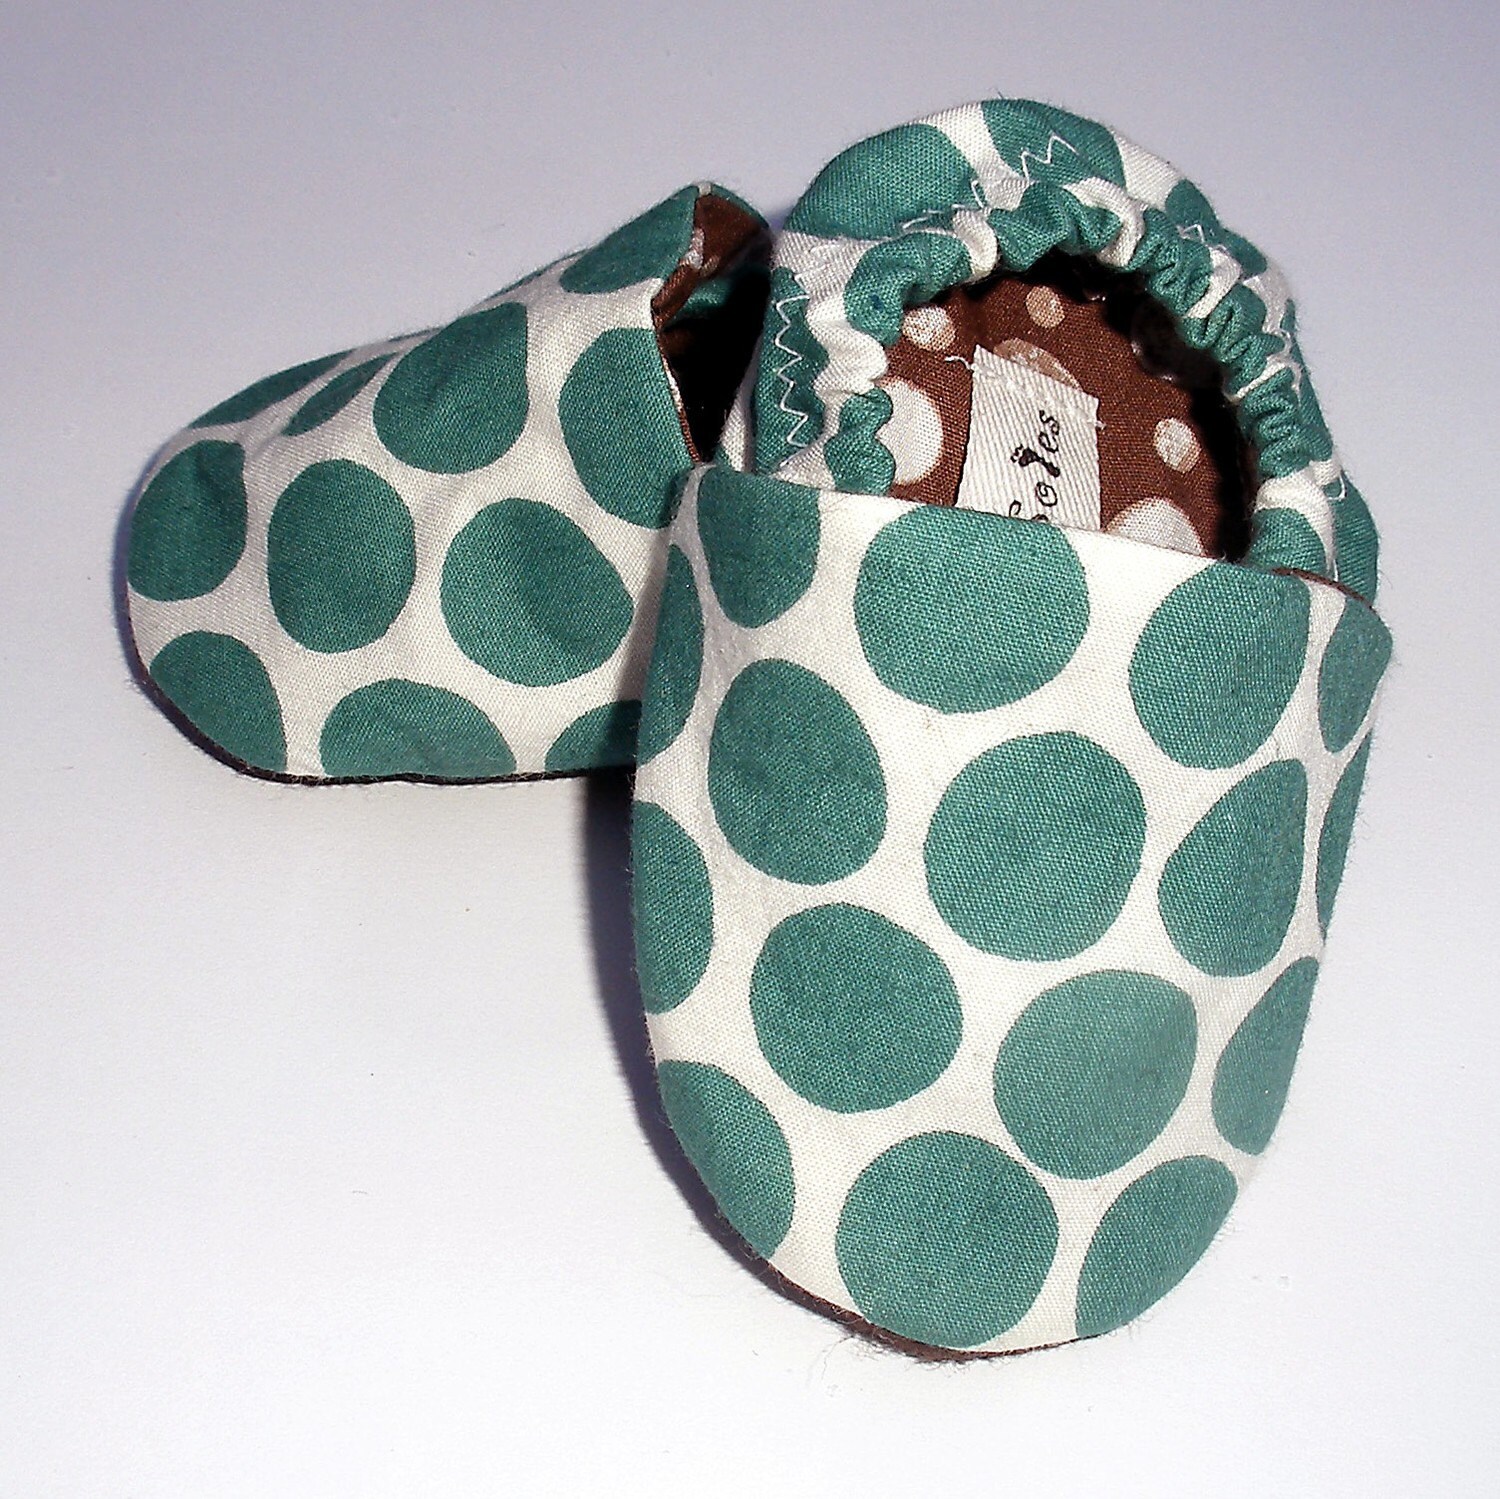 Unisex Crib Shoes in Mineral Dot- Size 0 3 6 9 12 18 24 months